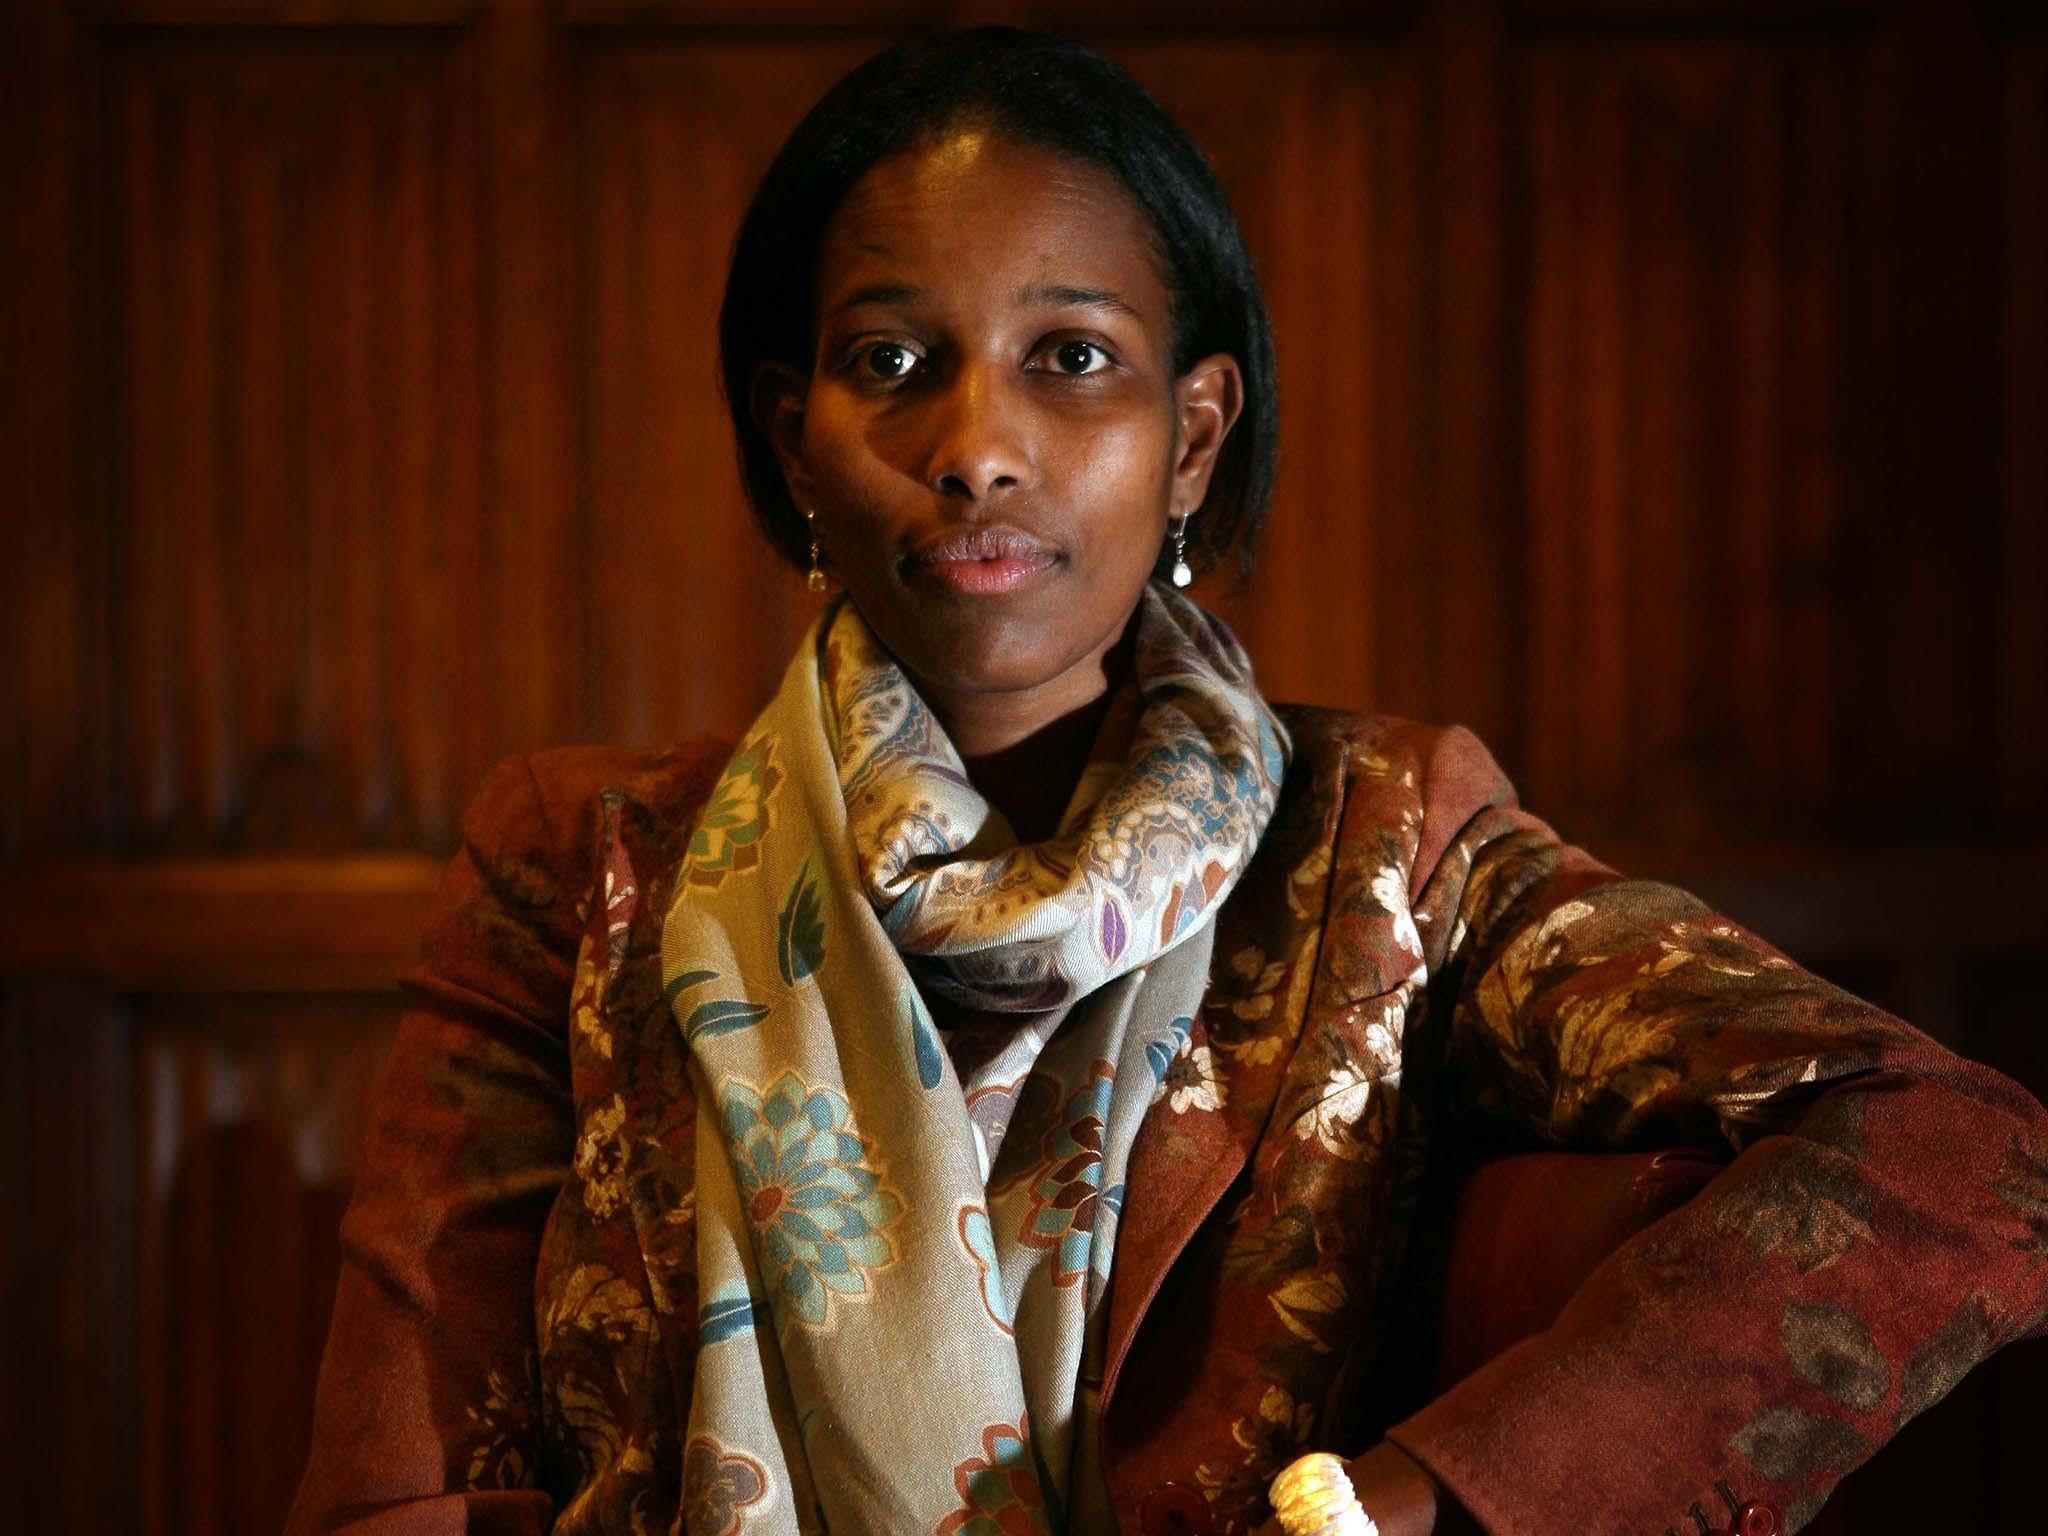 Hirsi Ali The heretic who says Muslims need to re-think sex, money, and violence .. photo